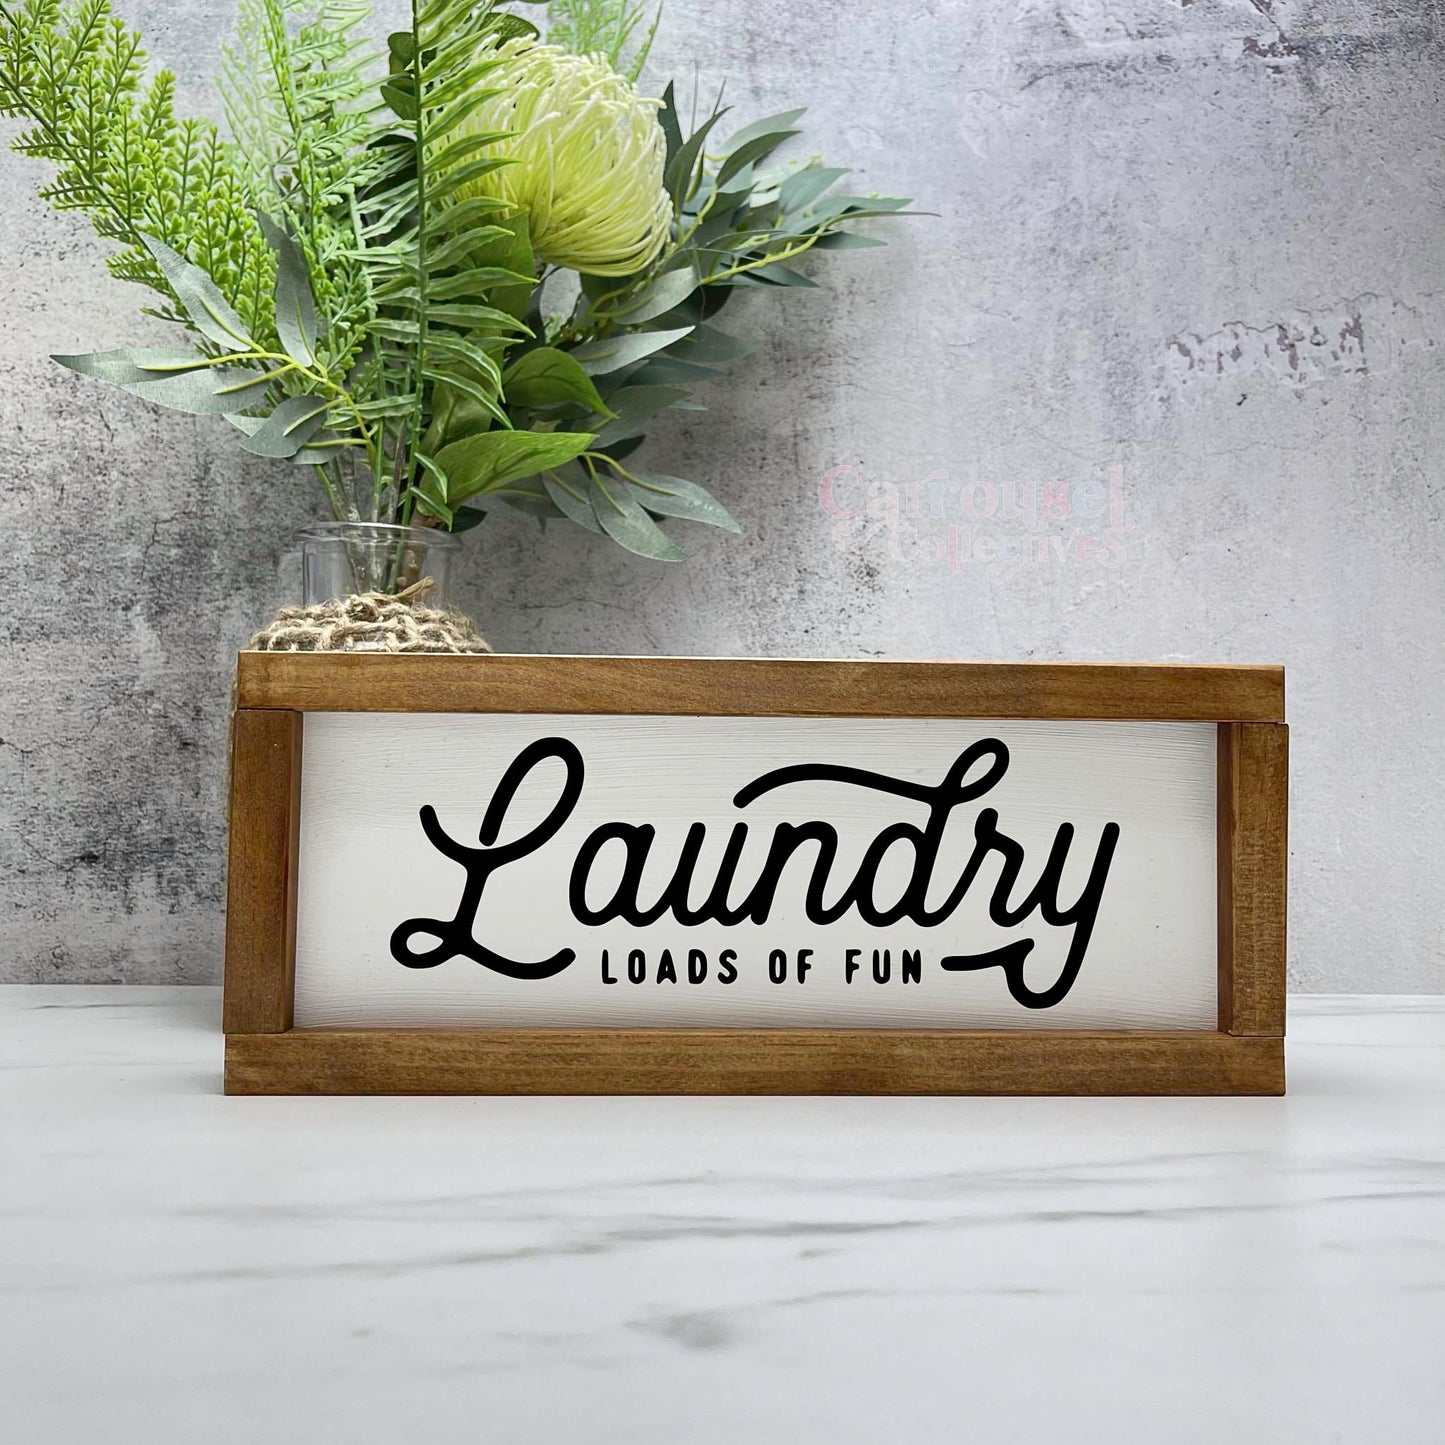 Laundry loads of fun sign, Framed laundry wood sign, laundry decor, home decor